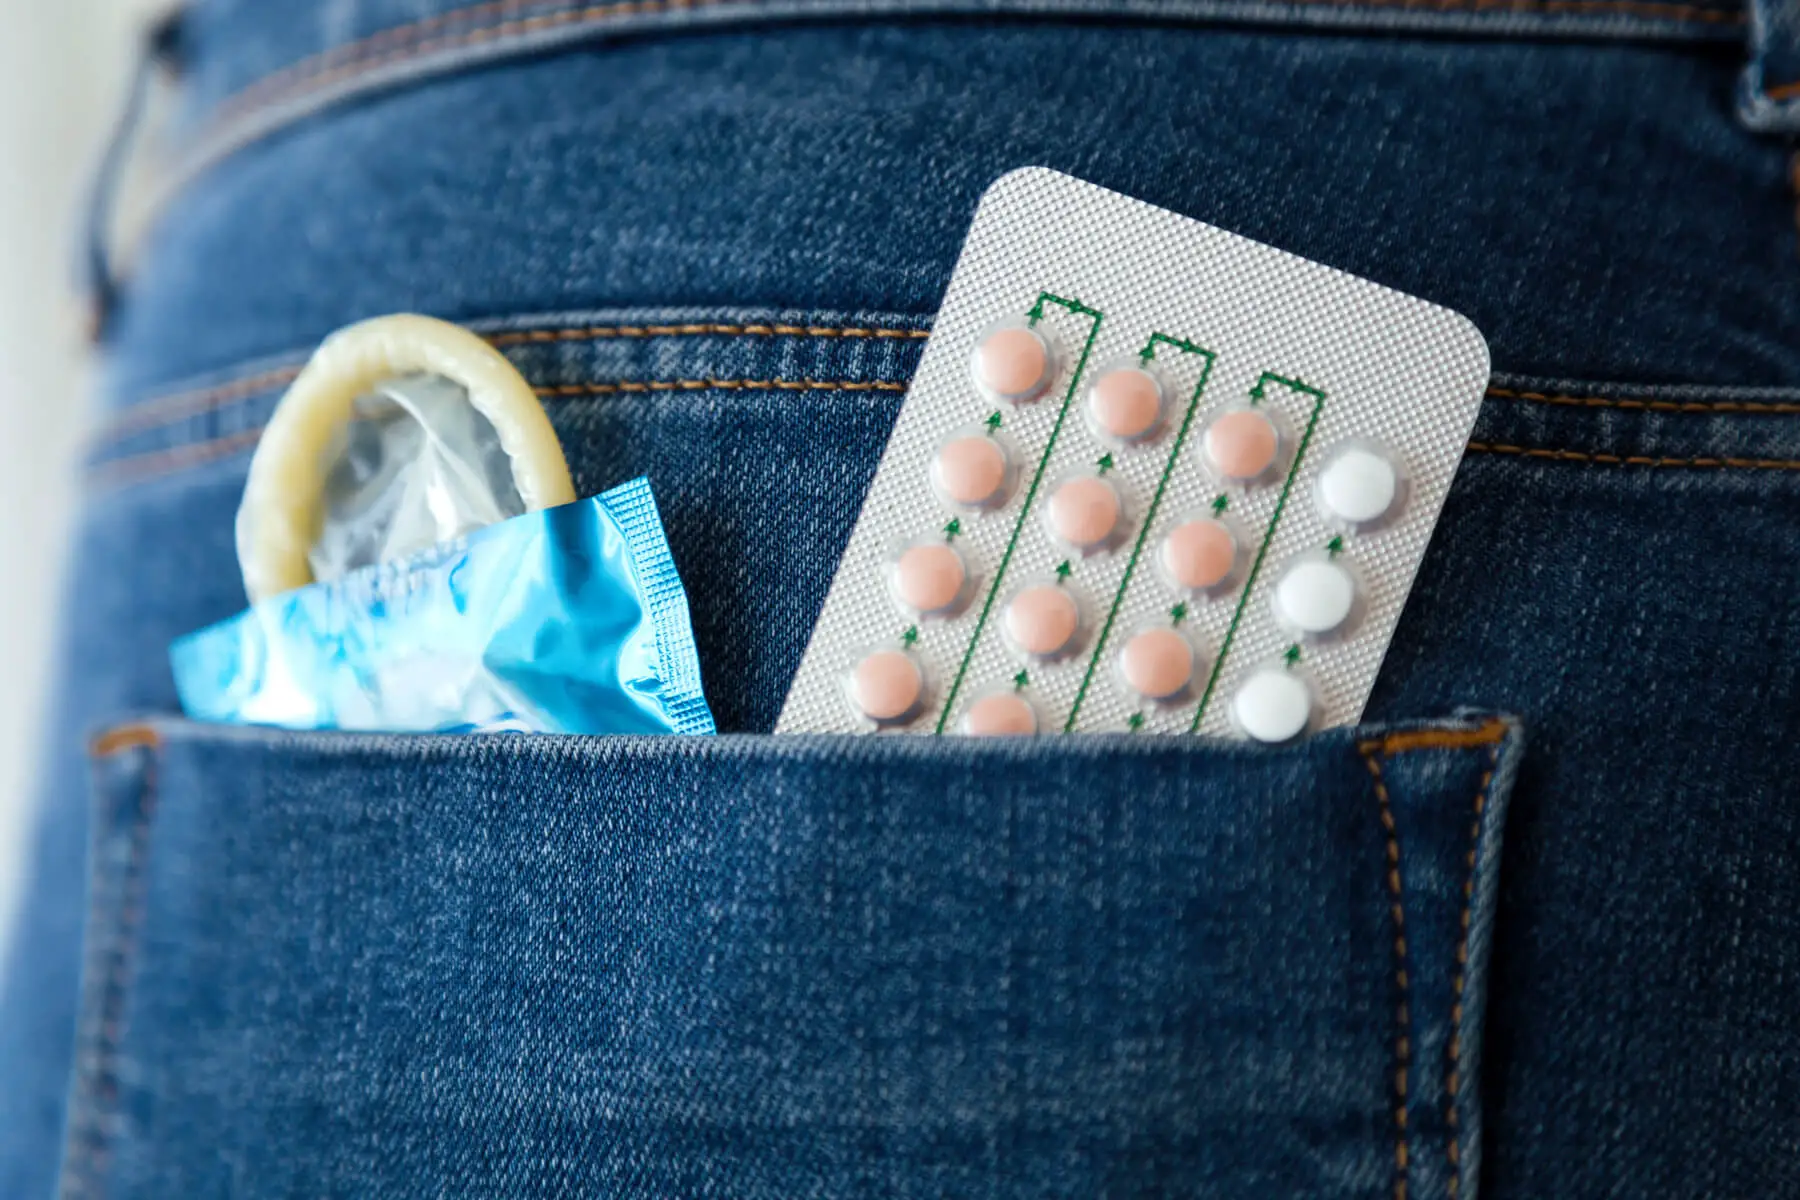 a woman's pocket filled with birth control pills and condoms